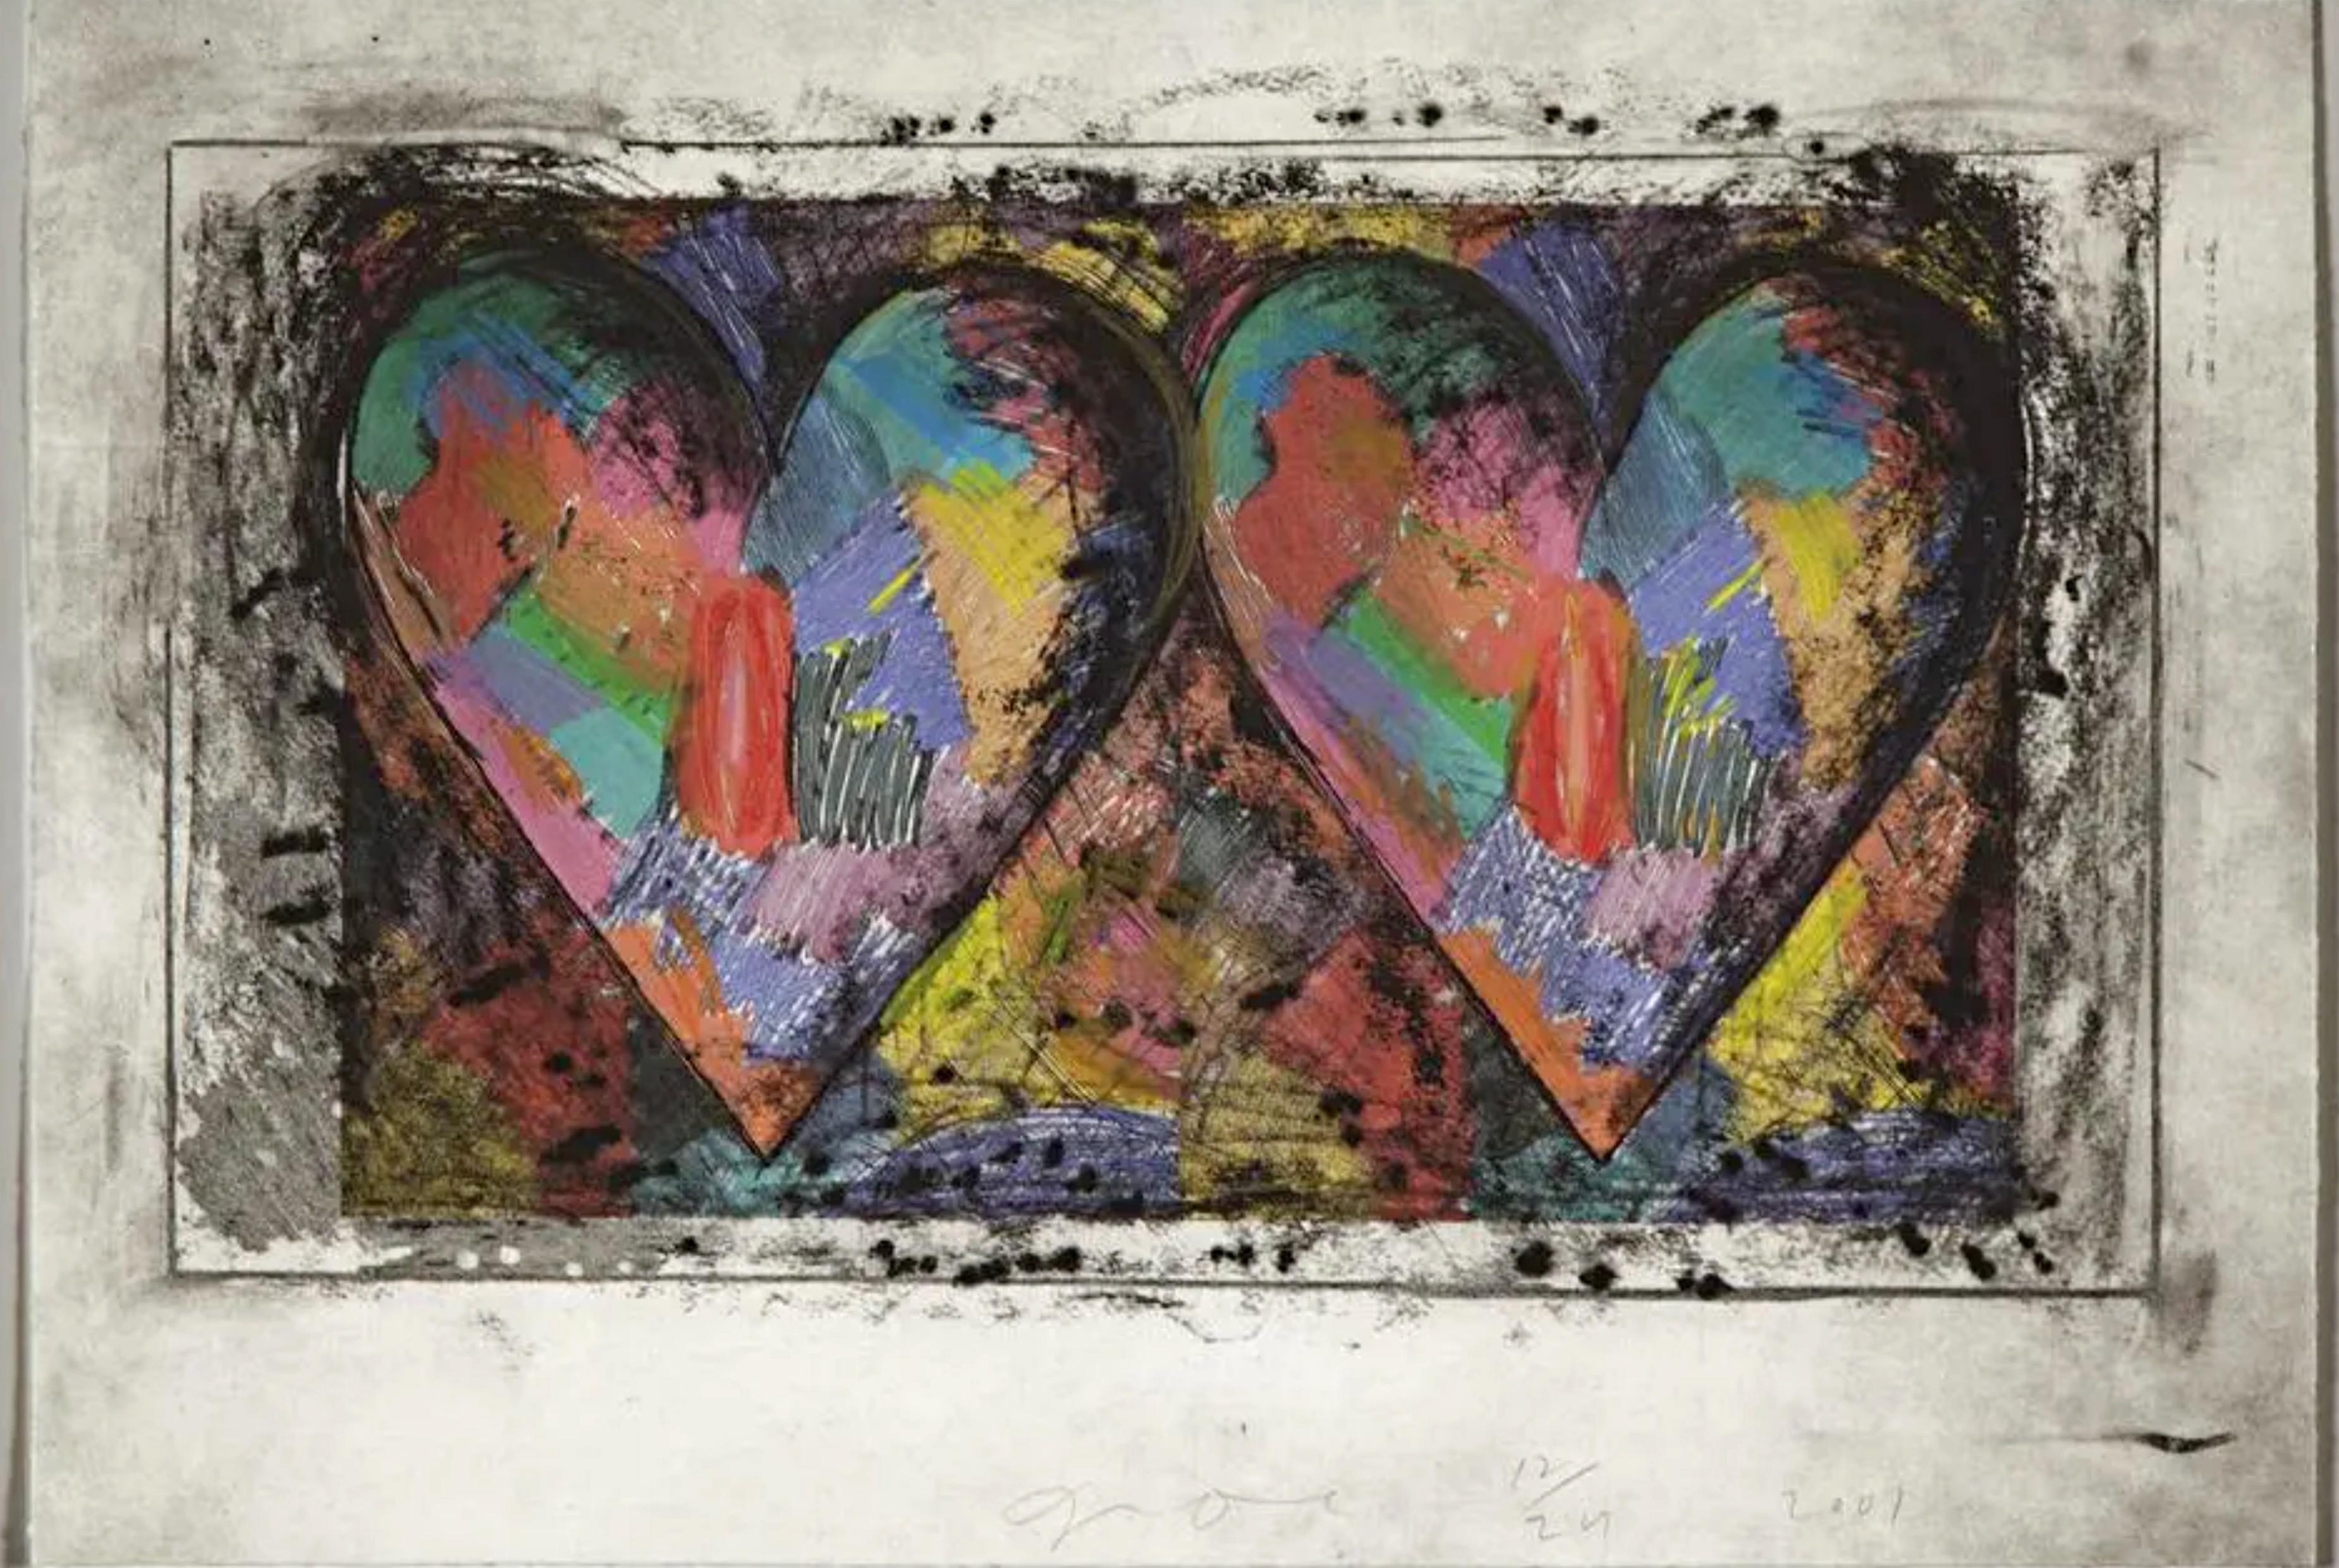 Two hearts with hand coloring in oil stick, signed & numbered (unique variation) - Art by Jim Dine